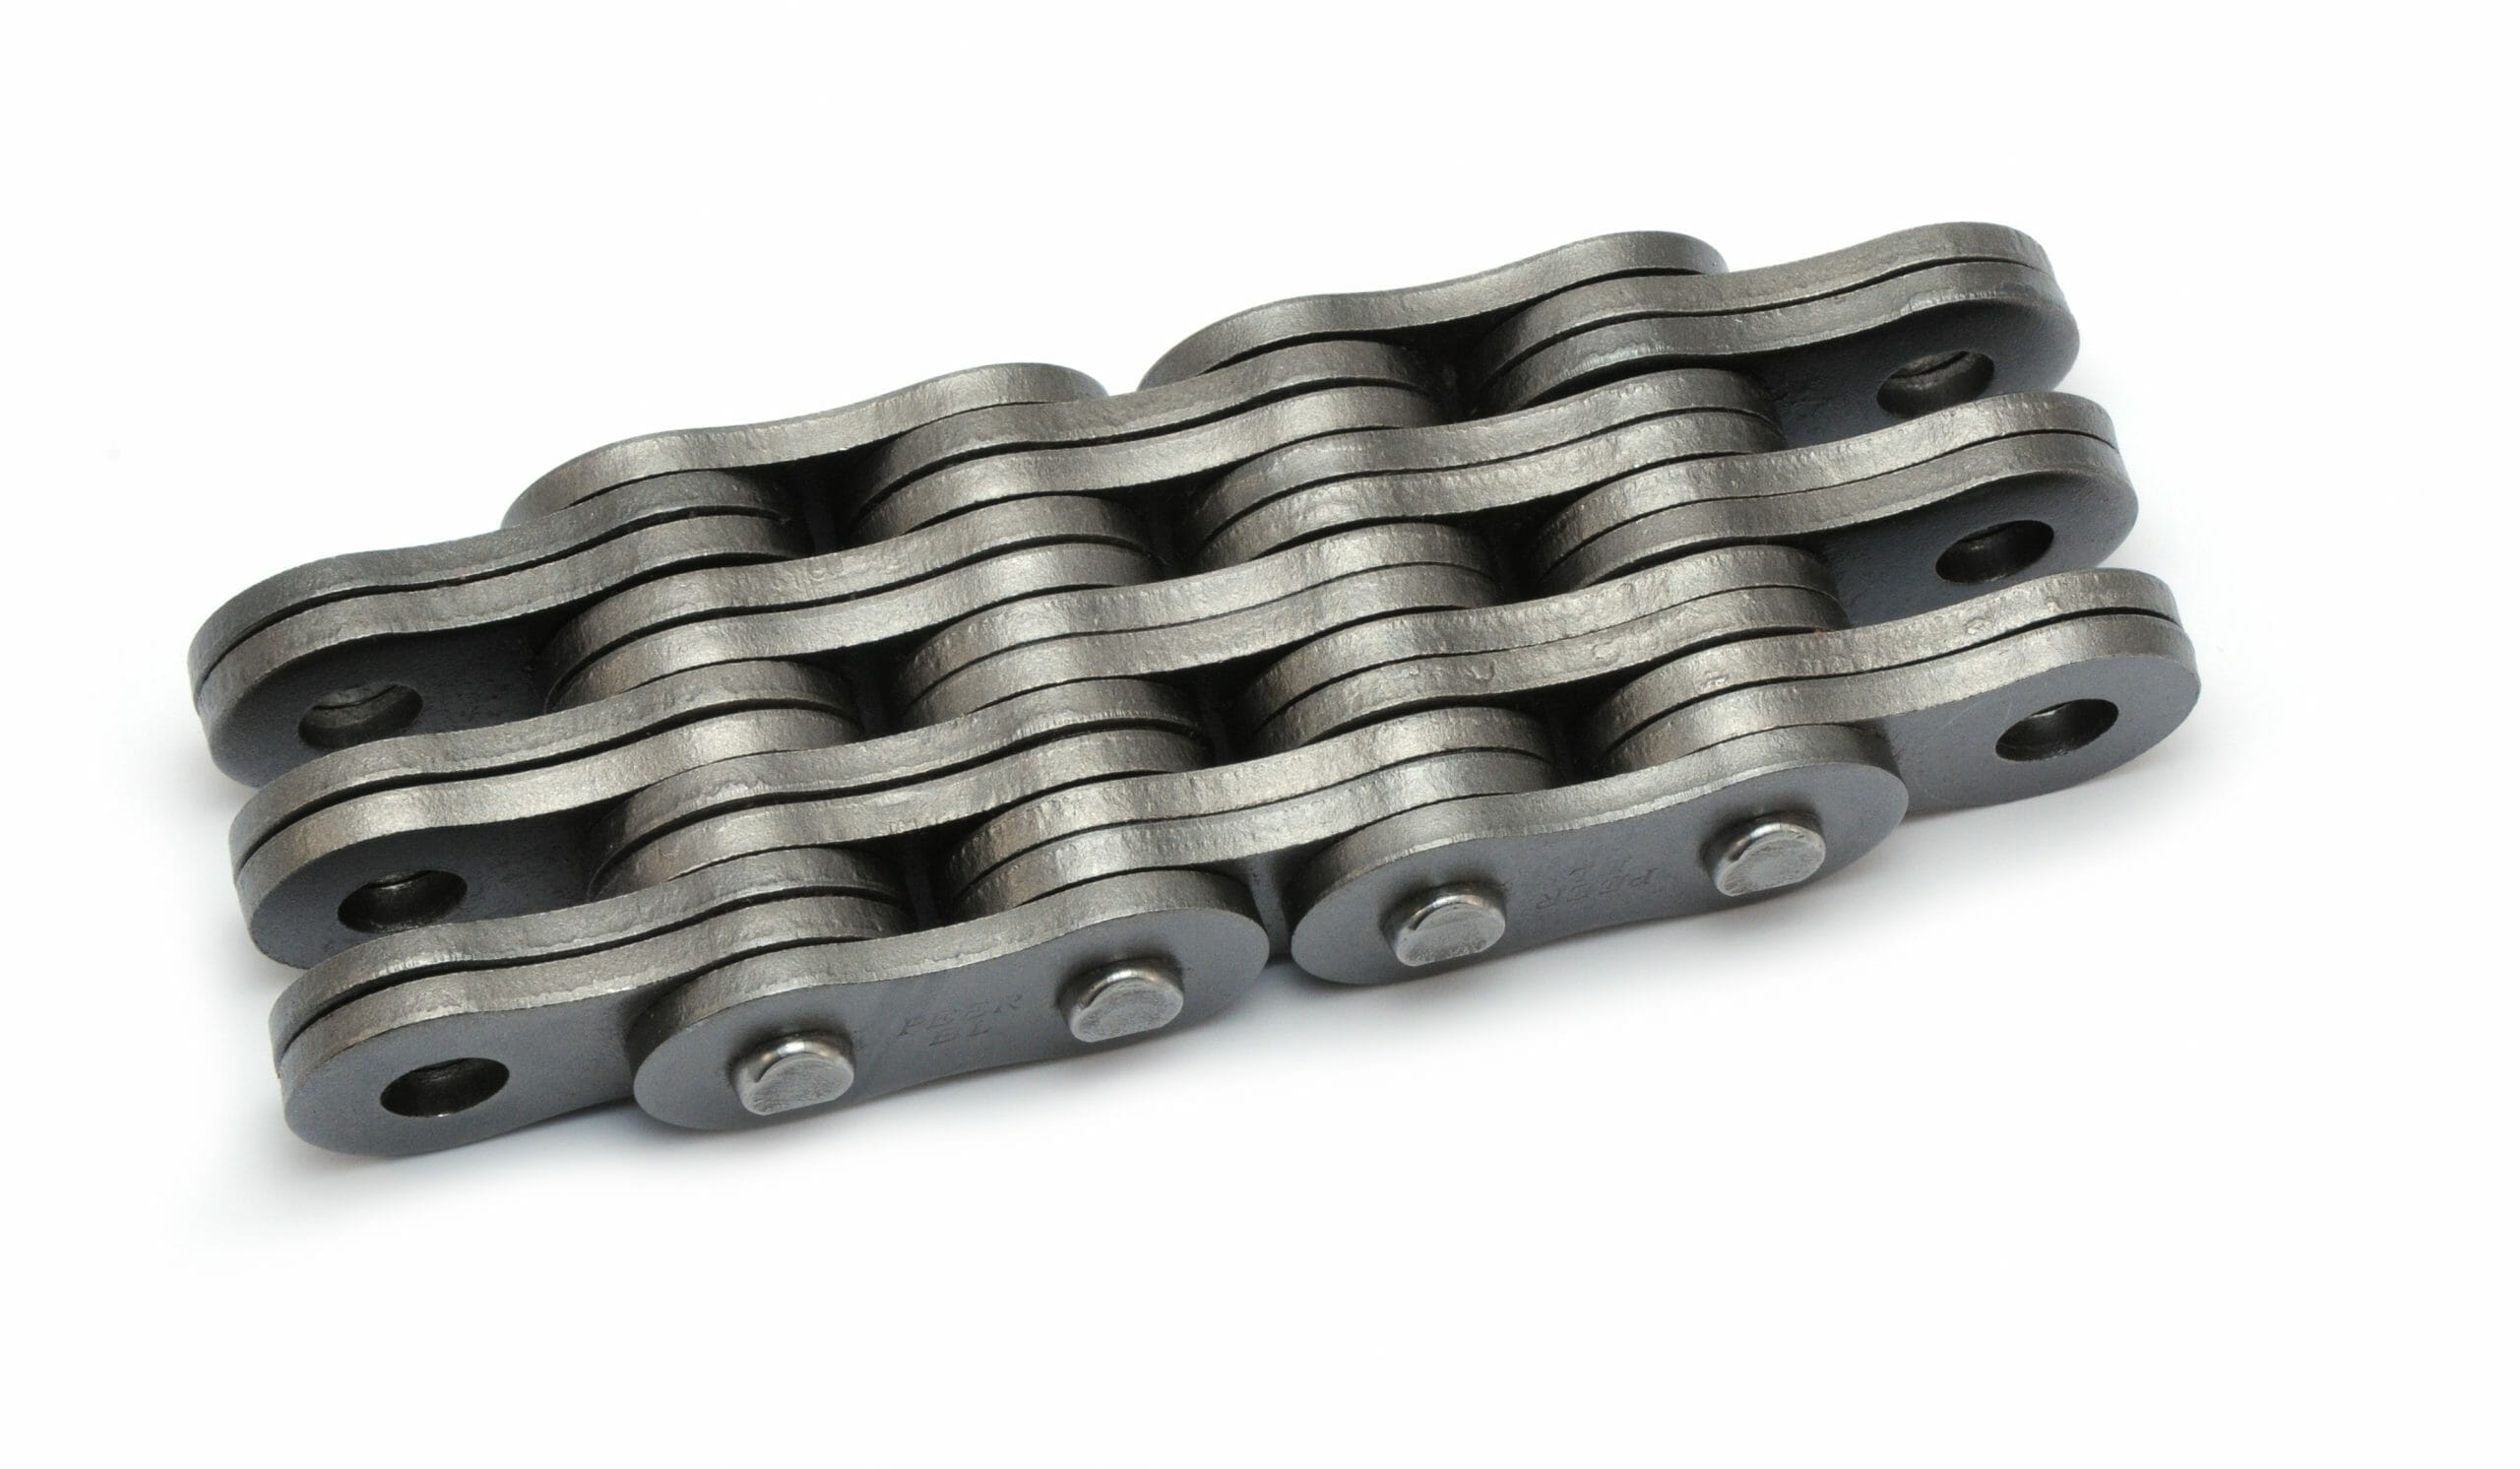 33.76 mm Pin Length, Ametric BL 834 CP BL Series Leaf Chain LH1634 ISO Number 4.09 mm Plate Thickness 9.54 mm Pin Diameter 3x4 Plate Lacing 24.13 mm Plate Depth BL 834 ANSI Number 25.4 mm Pitch 1-005 